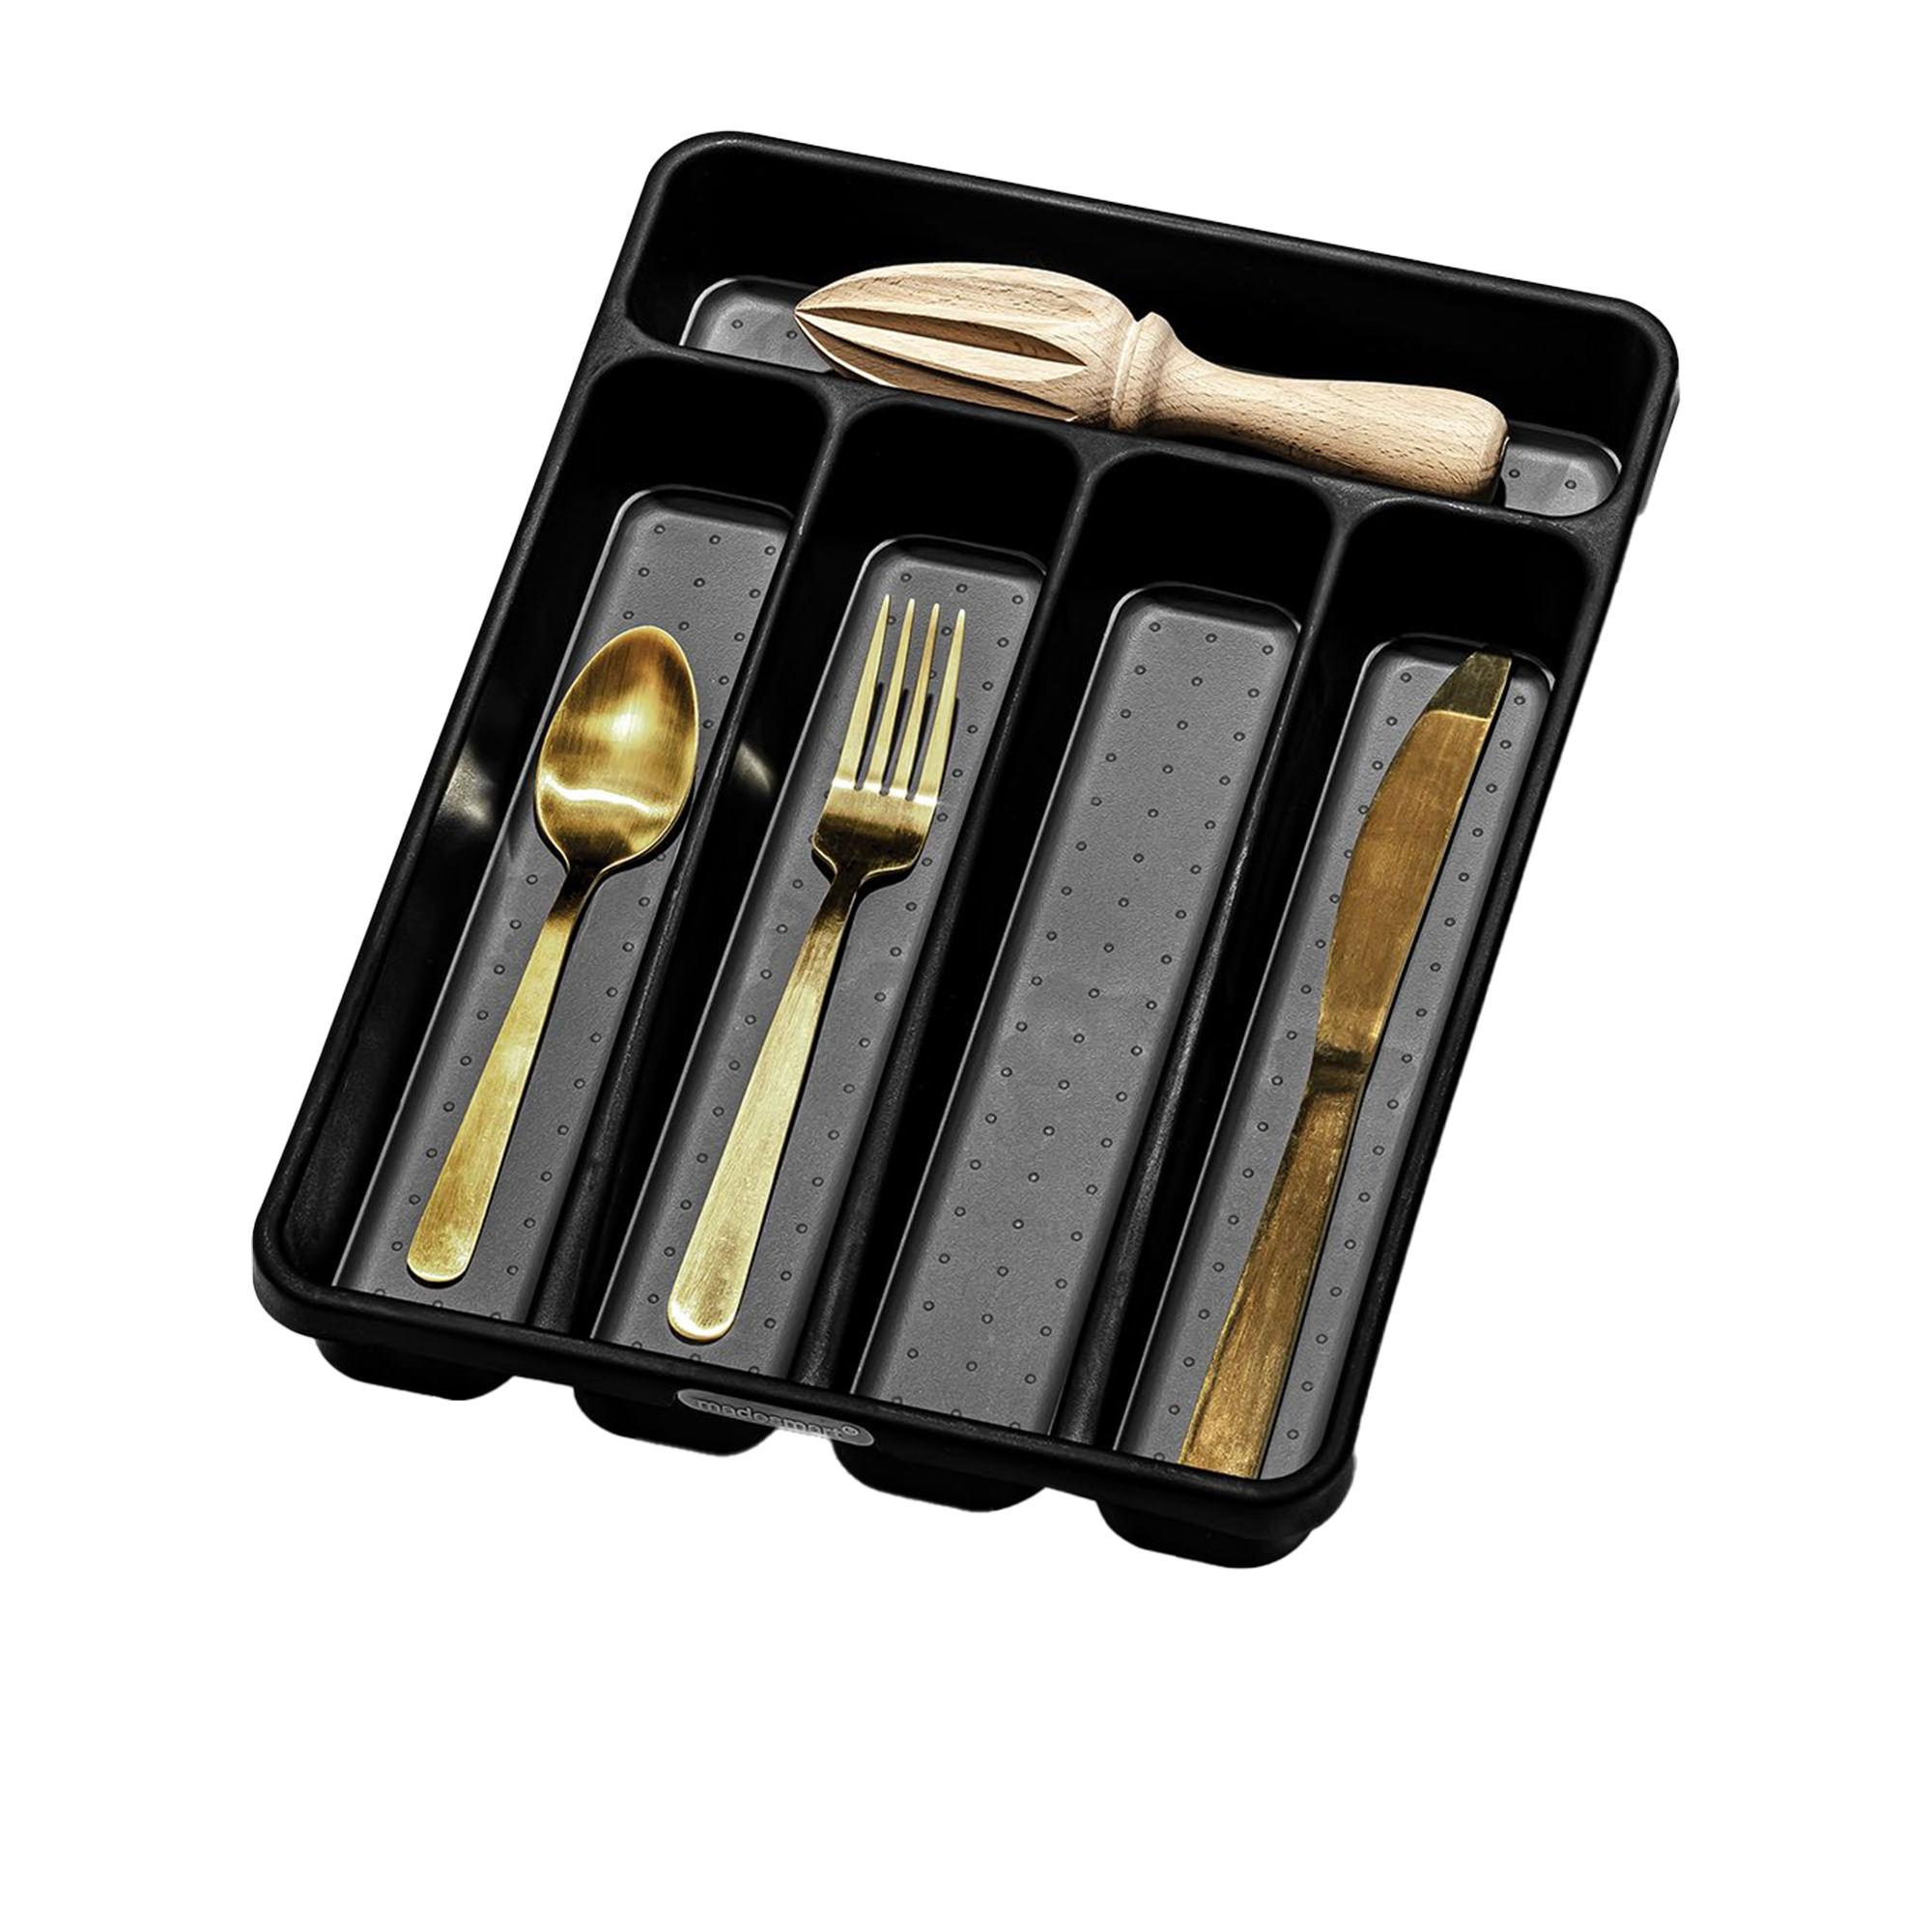 Madesmart Mini Cutlery Tray 5 Compartment Carbon Image 4